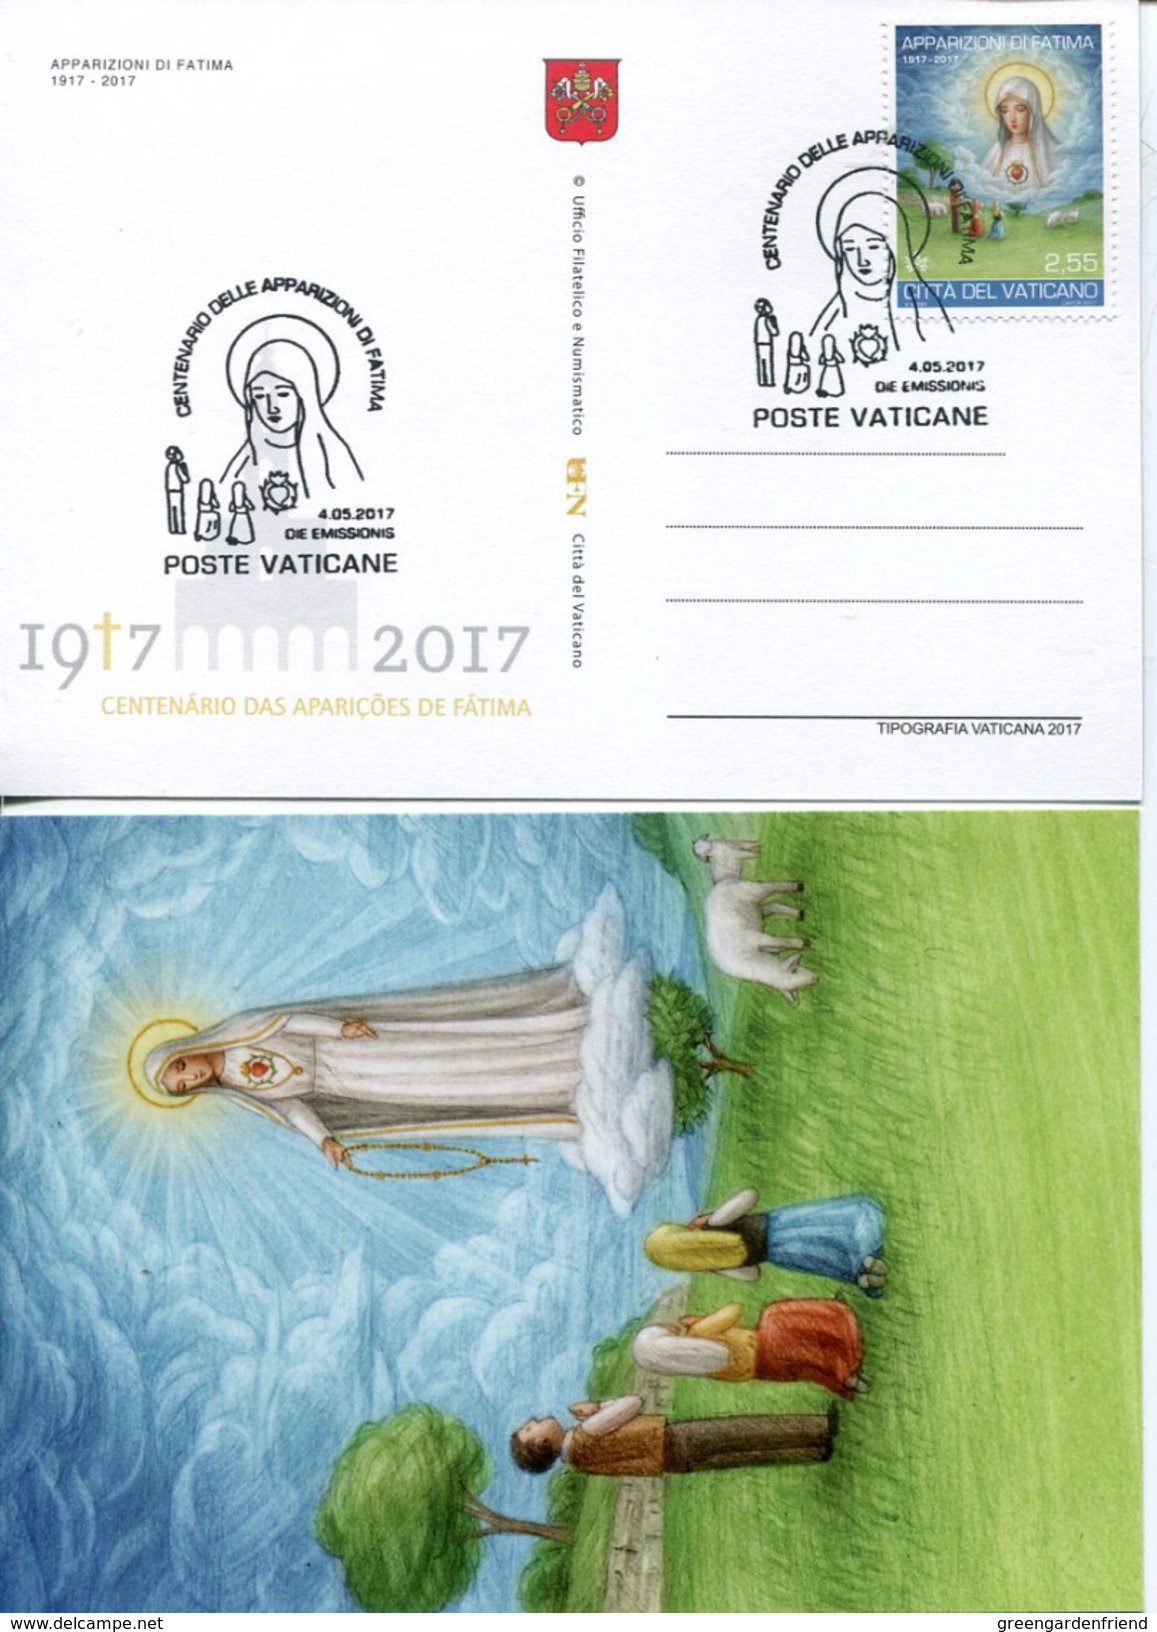 21761 Vaticano,special Card And Postmark 2017 For The Marian Apparitions Of Fatima, - Christianisme